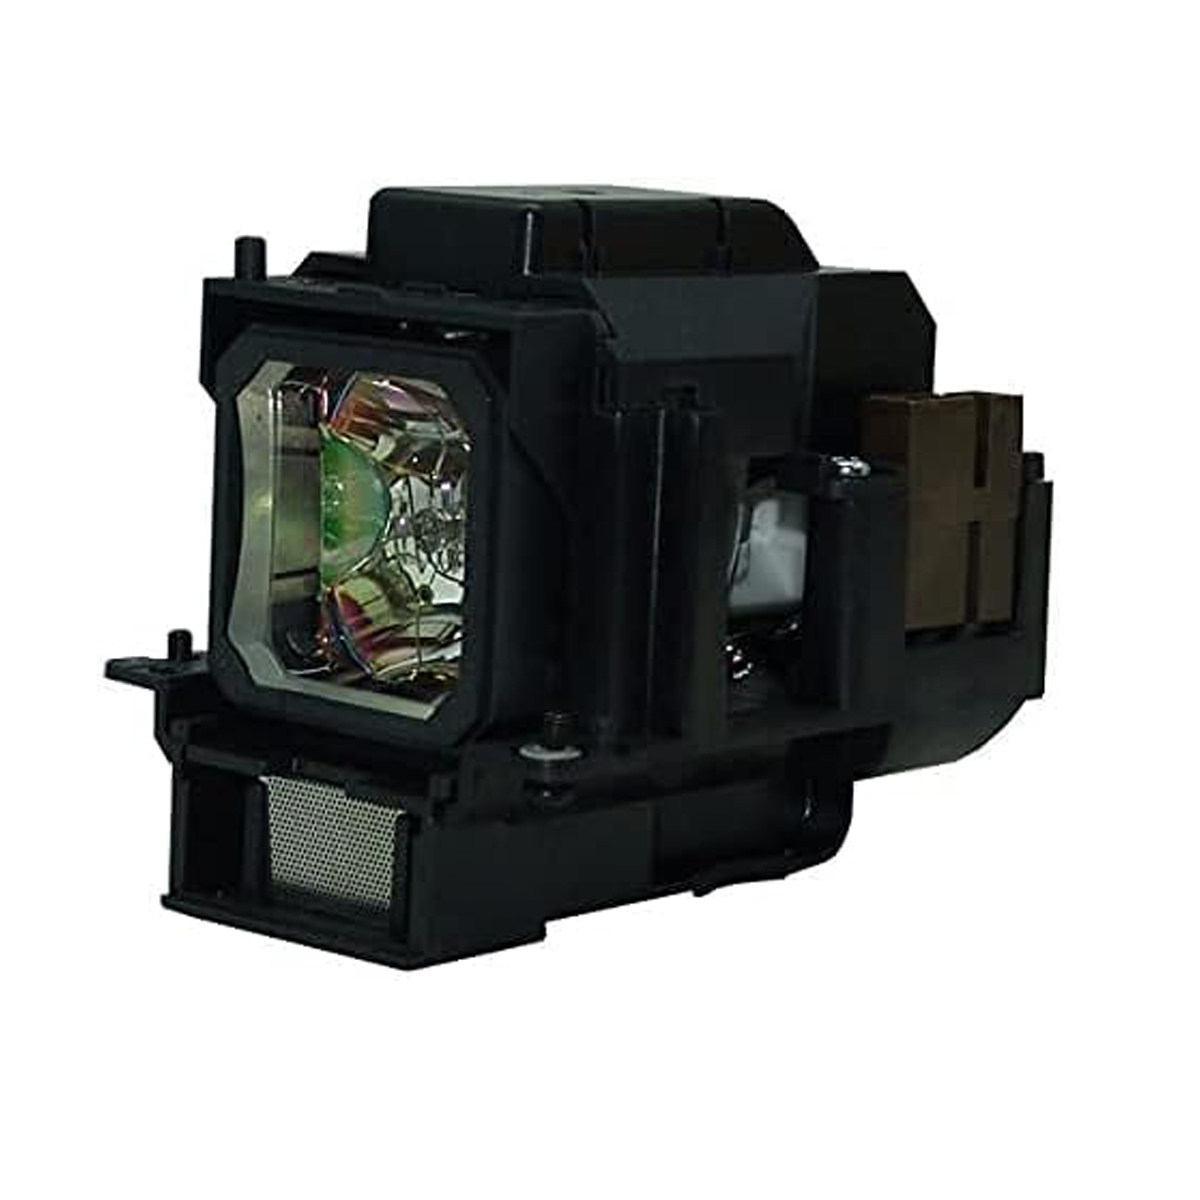 Replacement Projector lamp 465-8771 For Dukane Projector